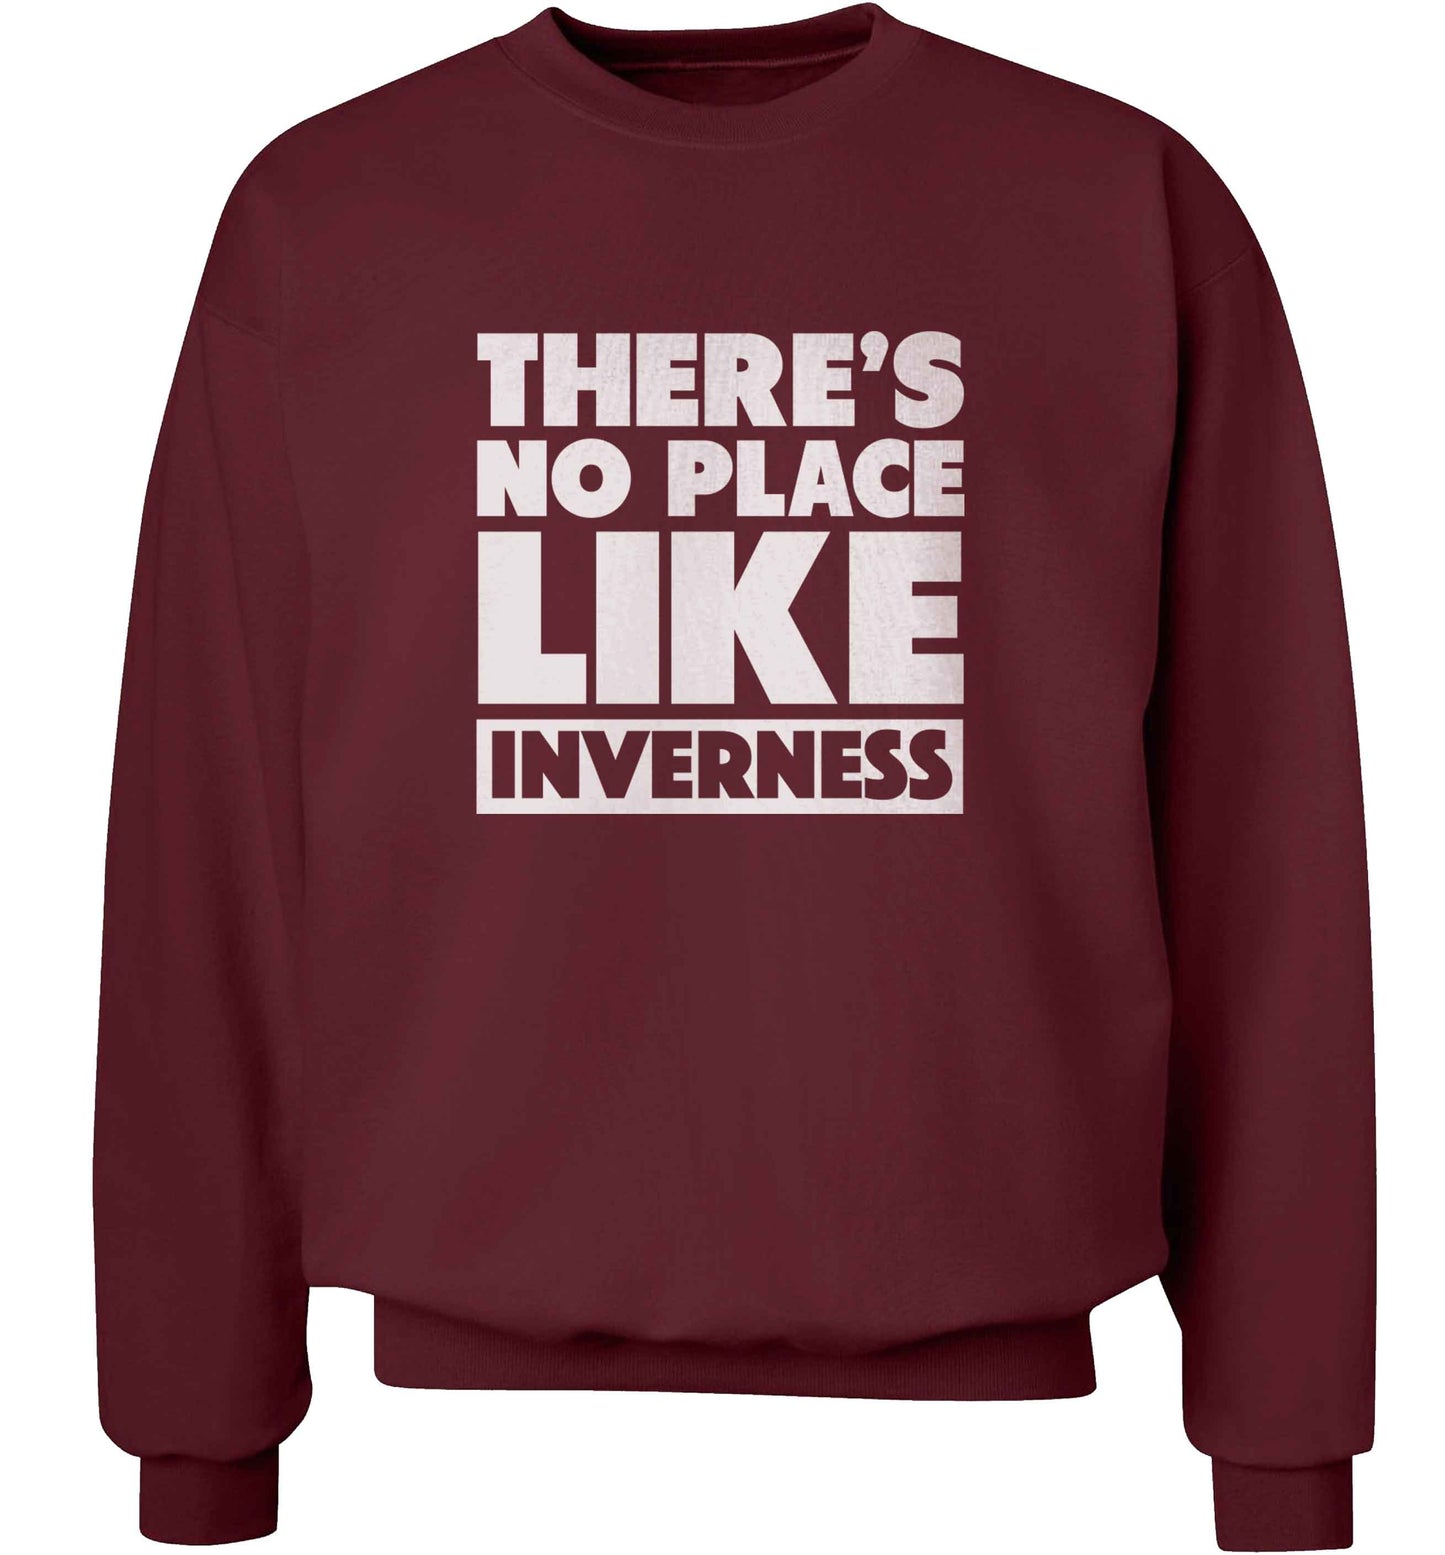 There's no place like Inverness adult's unisex maroon sweater 2XL